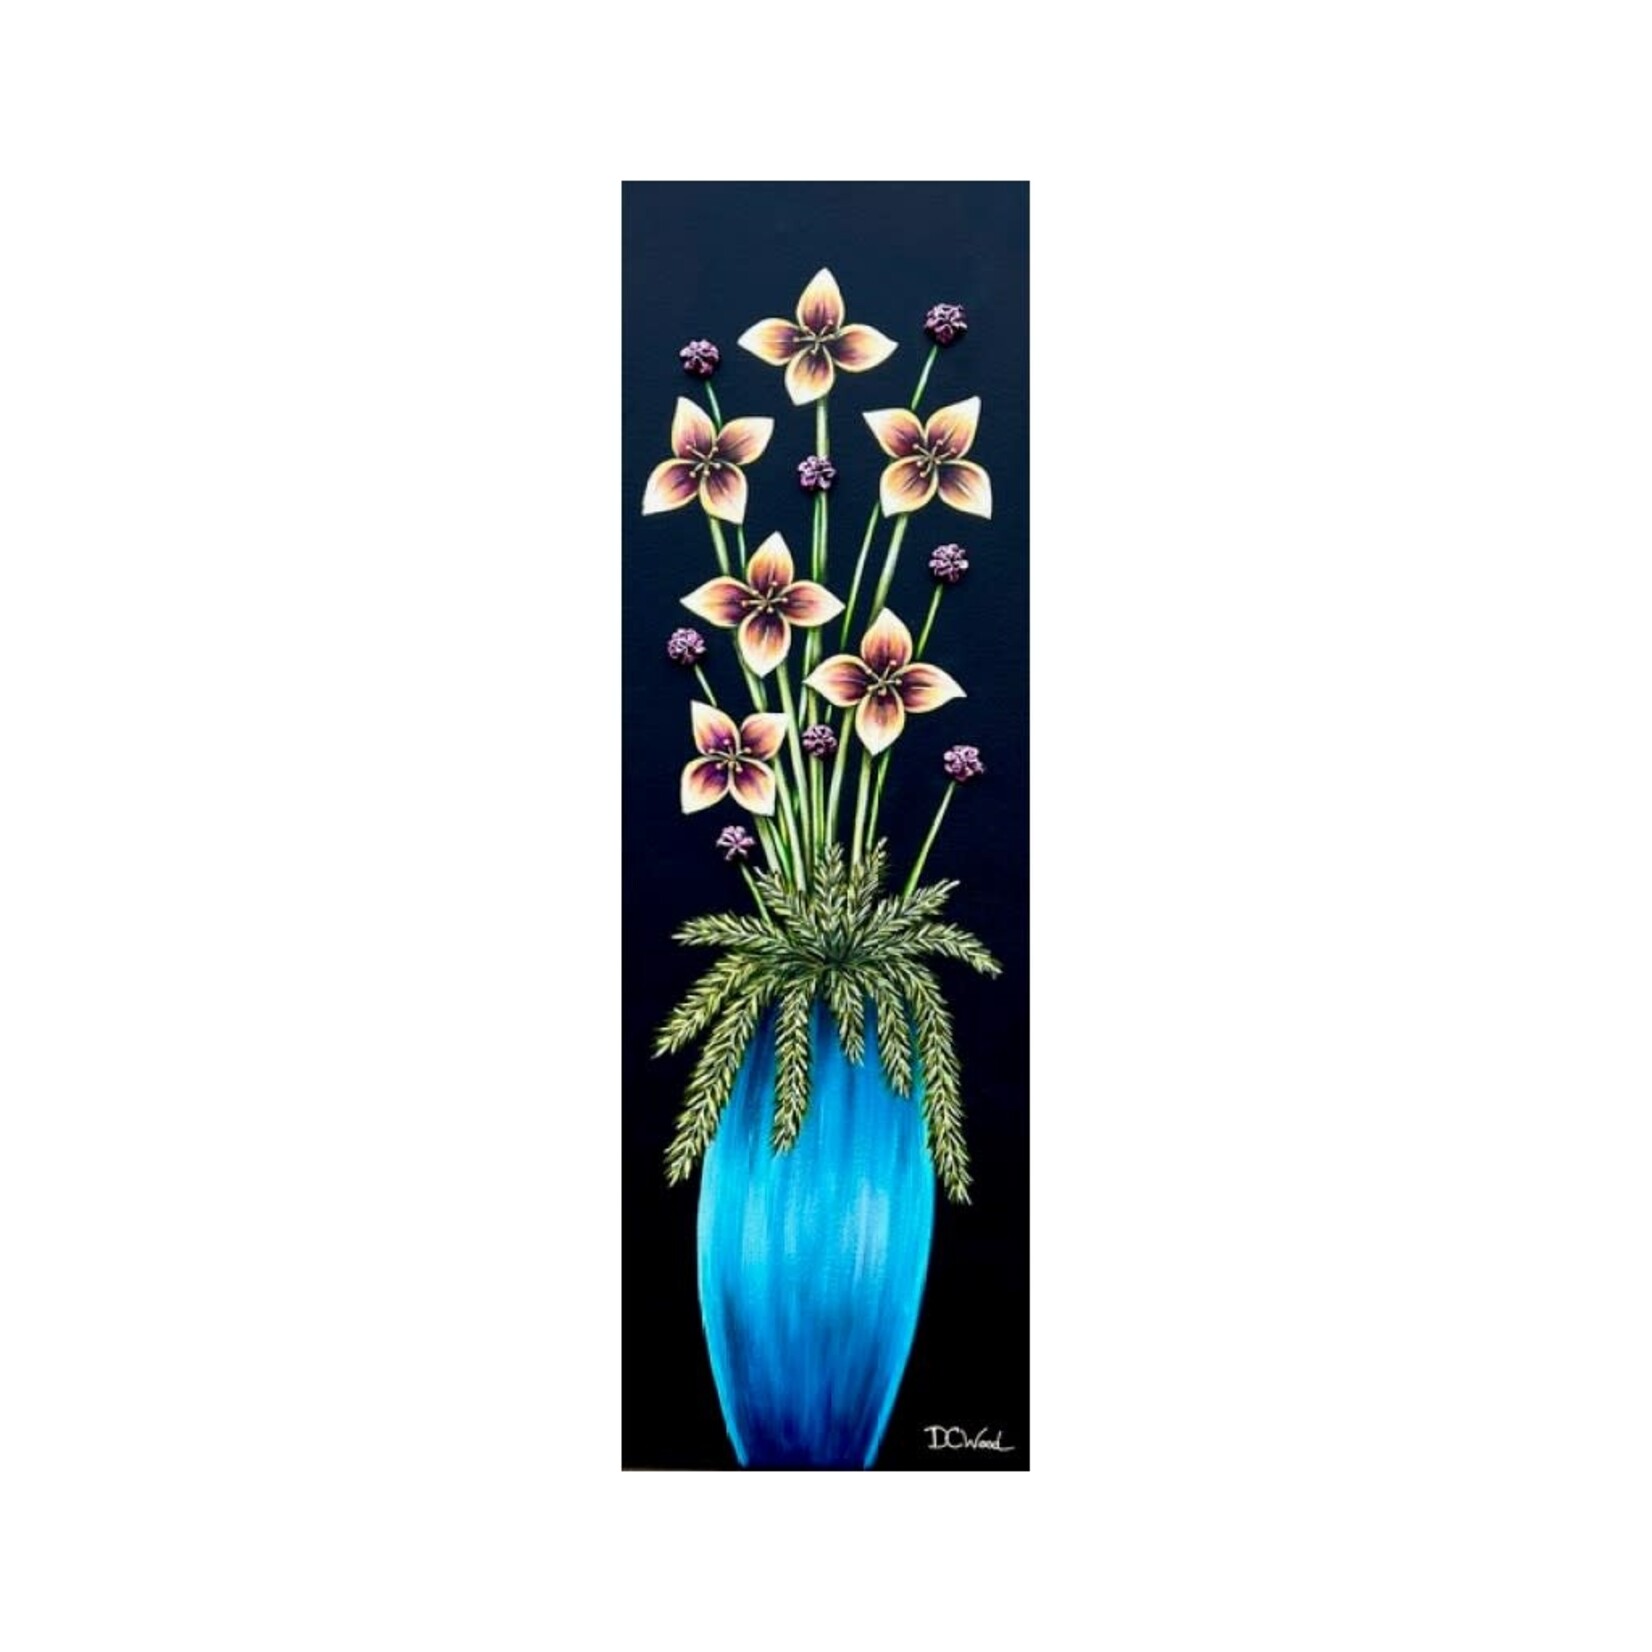 Denise Cassidy Wood Collection Petite Blooms - Vase Series 30x10 - Denise Cassidy Wood Original